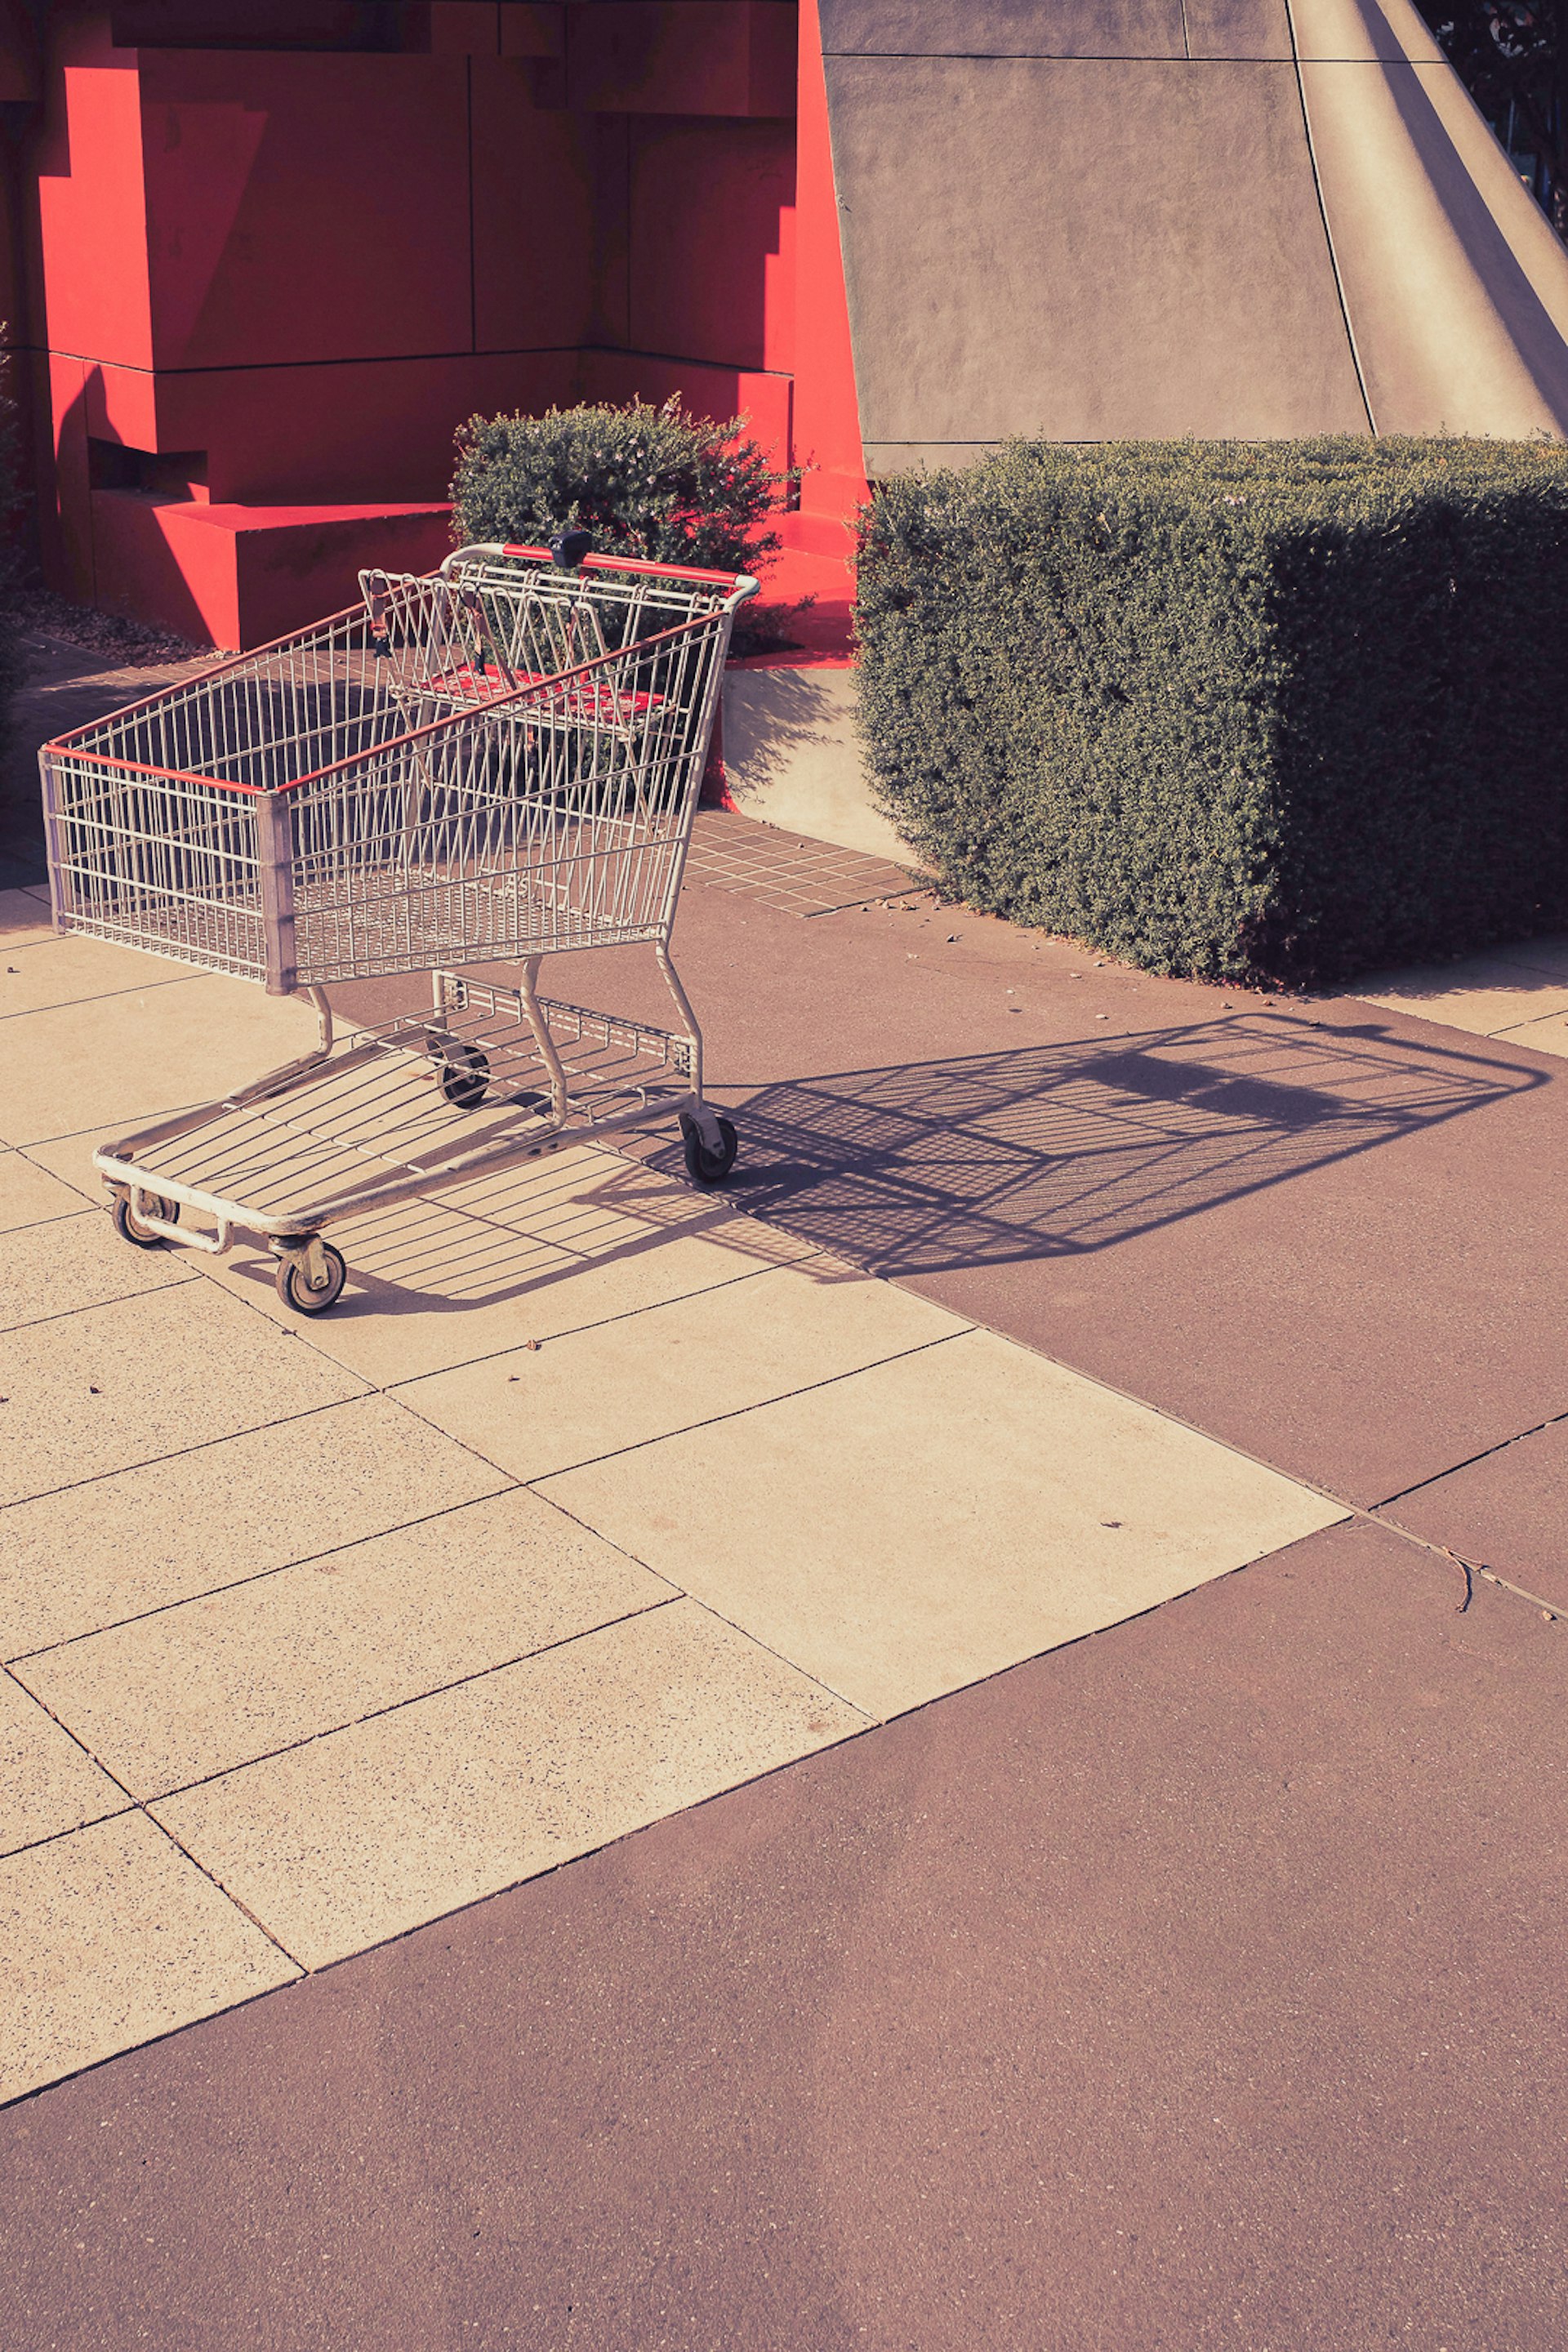 An empty shopping trolley stands in a courtyard.